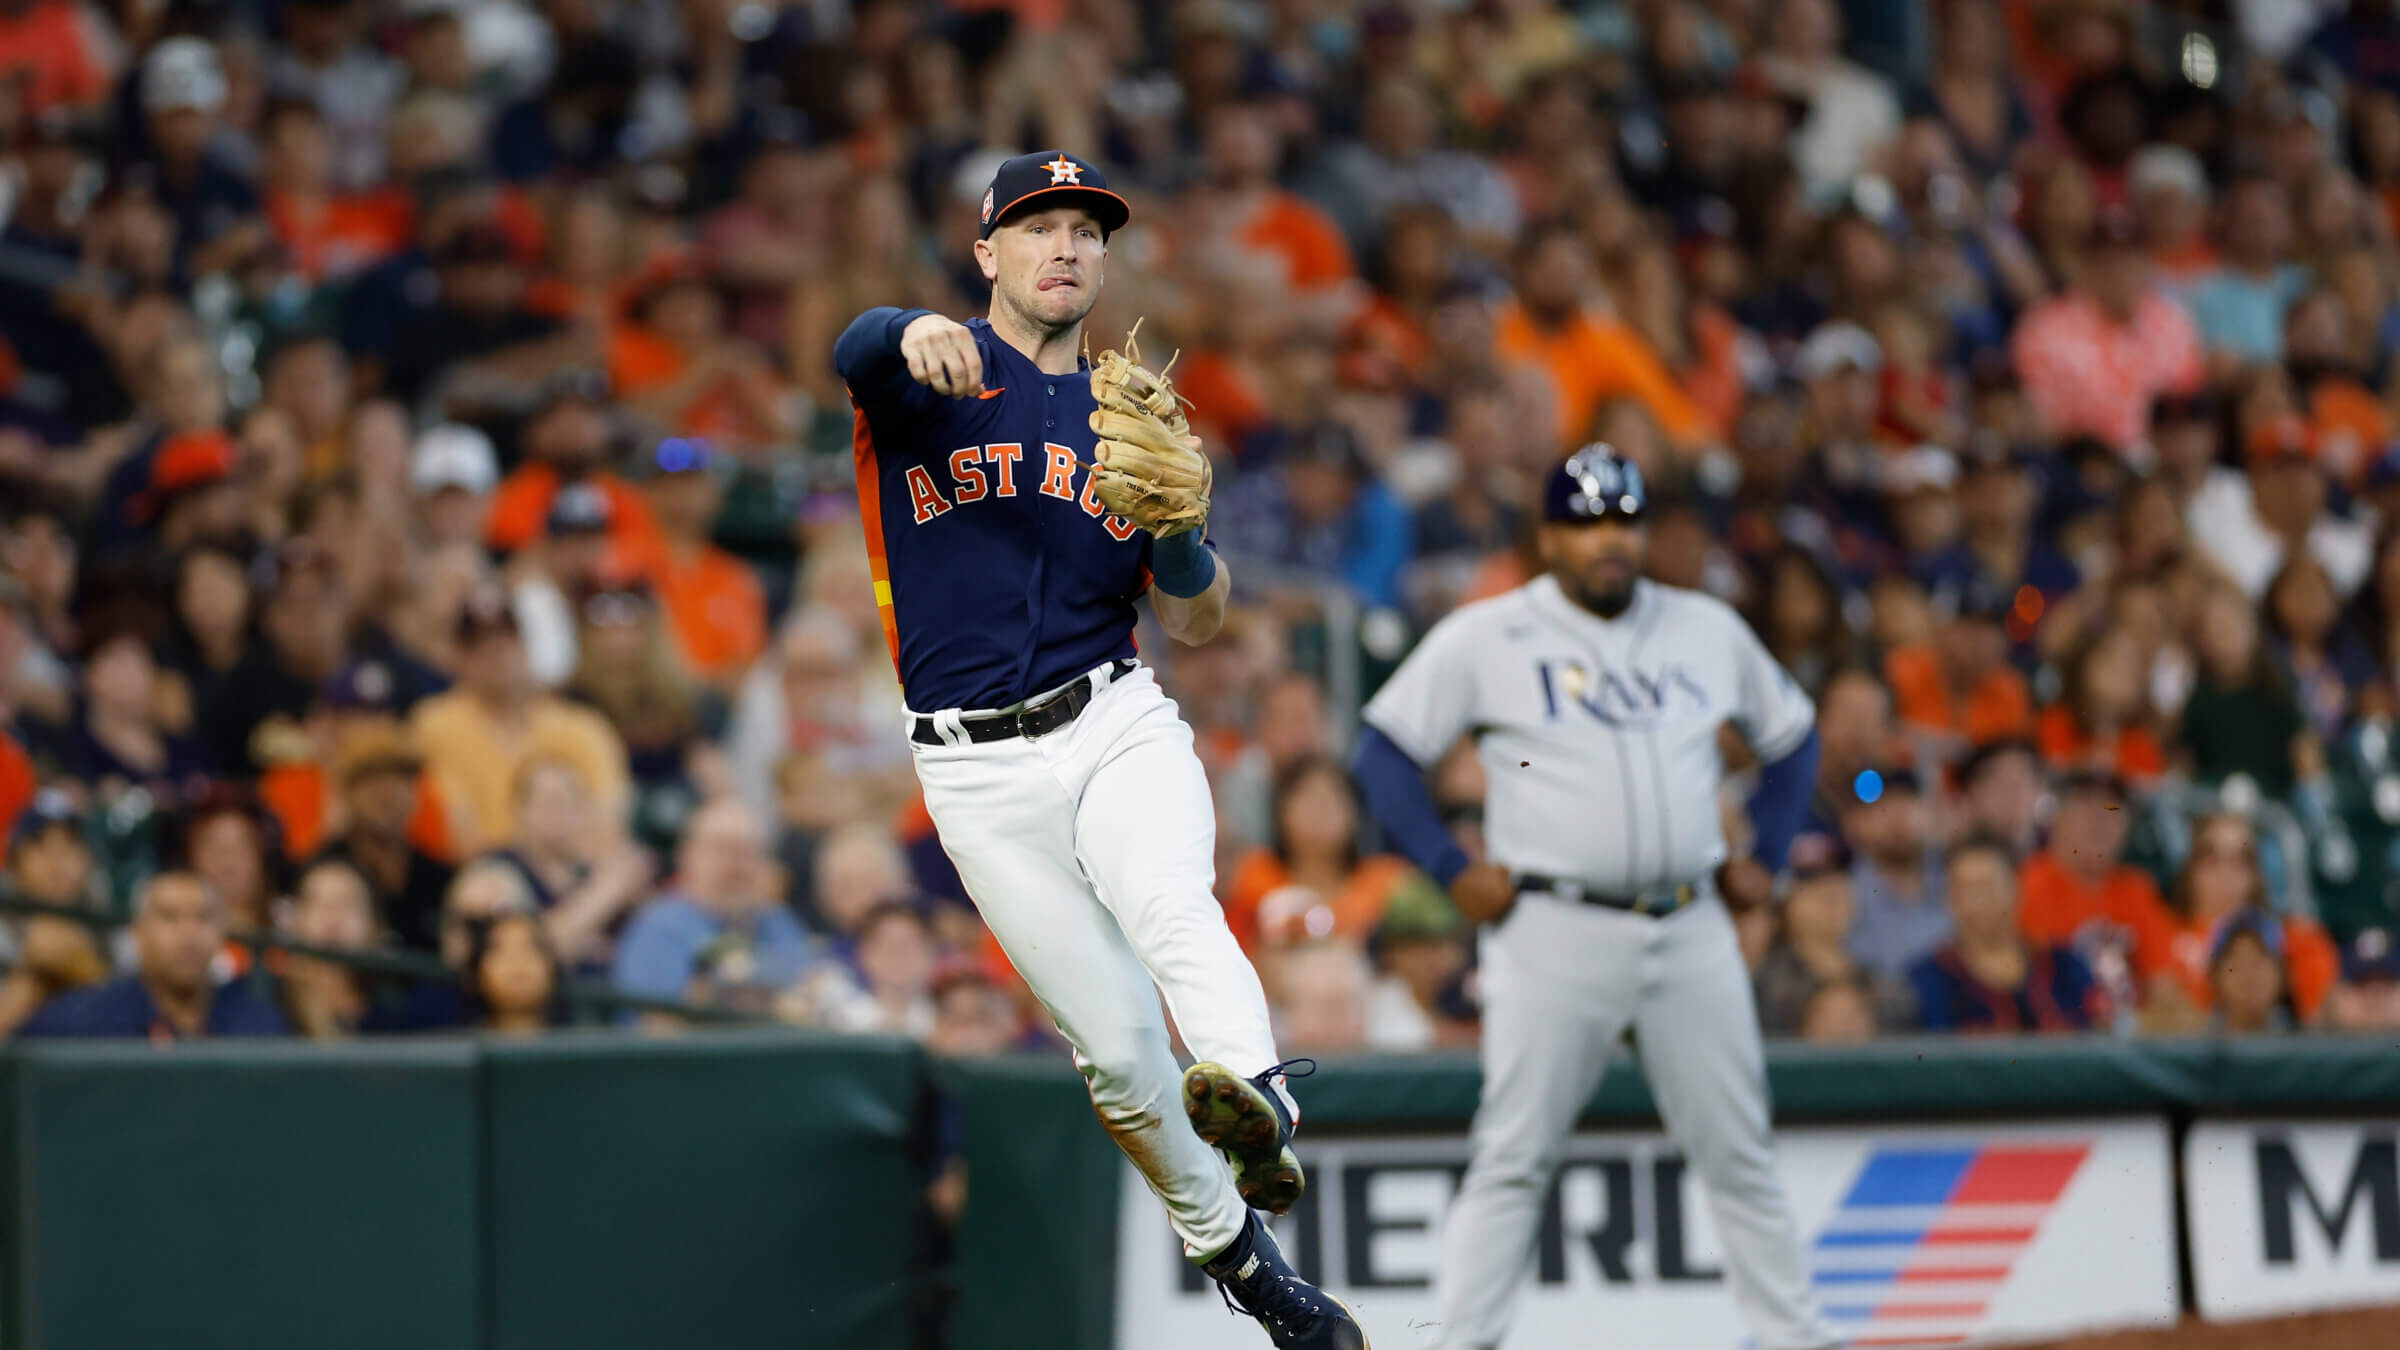 Alex Bregman faces the Tampa Bay Rays on Oct. 2, 2022.